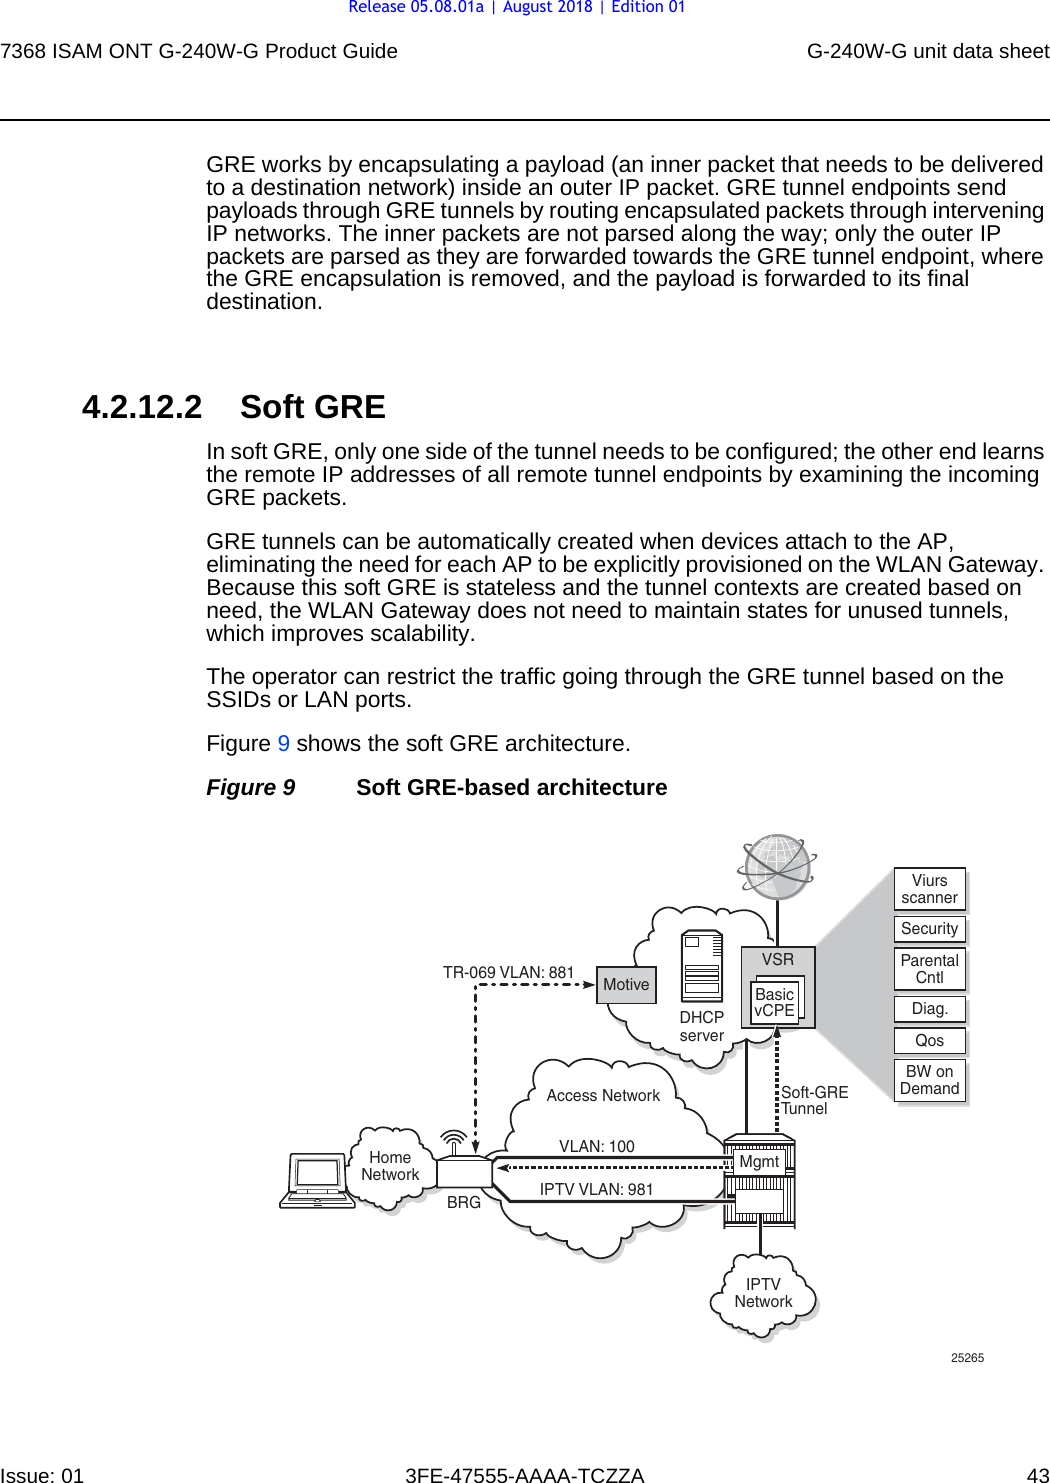 7368 ISAM ONT G-240W-G Product Guide G-240W-G unit data sheetIssue: 01 3FE-47555-AAAA-TCZZA 43 GRE works by encapsulating a payload (an inner packet that needs to be delivered to a destination network) inside an outer IP packet. GRE tunnel endpoints send payloads through GRE tunnels by routing encapsulated packets through intervening IP networks. The inner packets are not parsed along the way; only the outer IP packets are parsed as they are forwarded towards the GRE tunnel endpoint, where the GRE encapsulation is removed, and the payload is forwarded to its final destination.4.2.12.2 Soft GREIn soft GRE, only one side of the tunnel needs to be configured; the other end learns the remote IP addresses of all remote tunnel endpoints by examining the incoming GRE packets. GRE tunnels can be automatically created when devices attach to the AP, eliminating the need for each AP to be explicitly provisioned on the WLAN Gateway. Because this soft GRE is stateless and the tunnel contexts are created based on need, the WLAN Gateway does not need to maintain states for unused tunnels, which improves scalability.The operator can restrict the traffic going through the GRE tunnel based on the SSIDs or LAN ports.Figure 9 shows the soft GRE architecture.Figure 9 Soft GRE-based architectureDHCPserverMotiveAccess NetworkSecurityDiag.QosViursscannerParentalCntlBW onDemandBasicvCPEVSRHomeNetworkVLAN: 100Soft-GRETunnelTR-069 VLAN: 881IPTV VLAN: 981MgmtIPTVNetworkBRG25265Release 05.08.01a | August 2018 | Edition 01